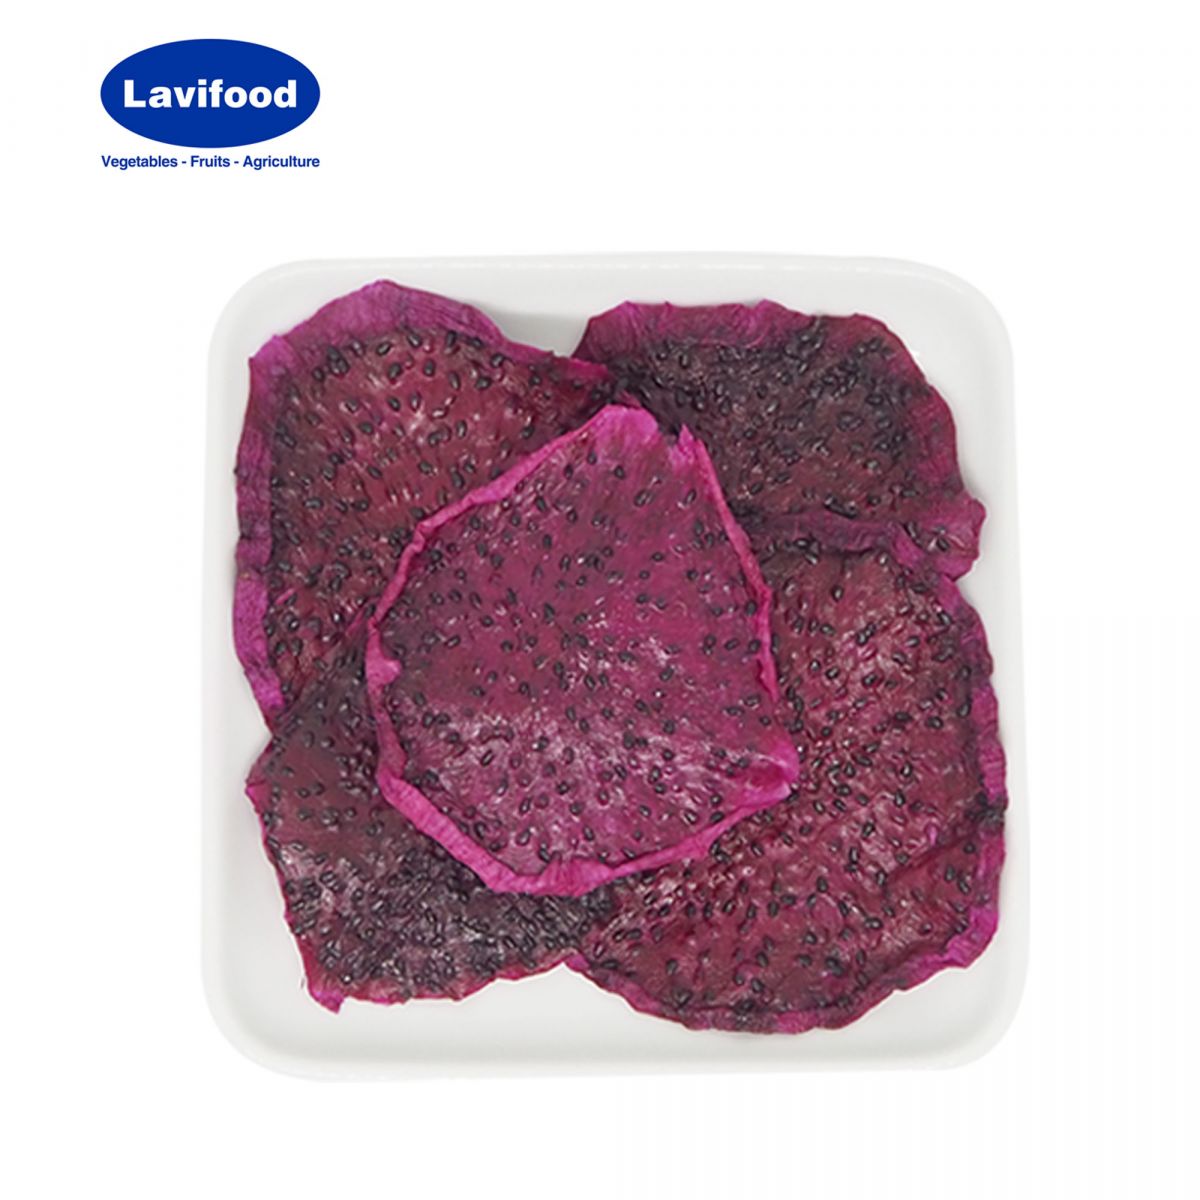 https://www.lavifood.com/en/products/dried-fruit-vegetables/dried-red-dragon-fruit